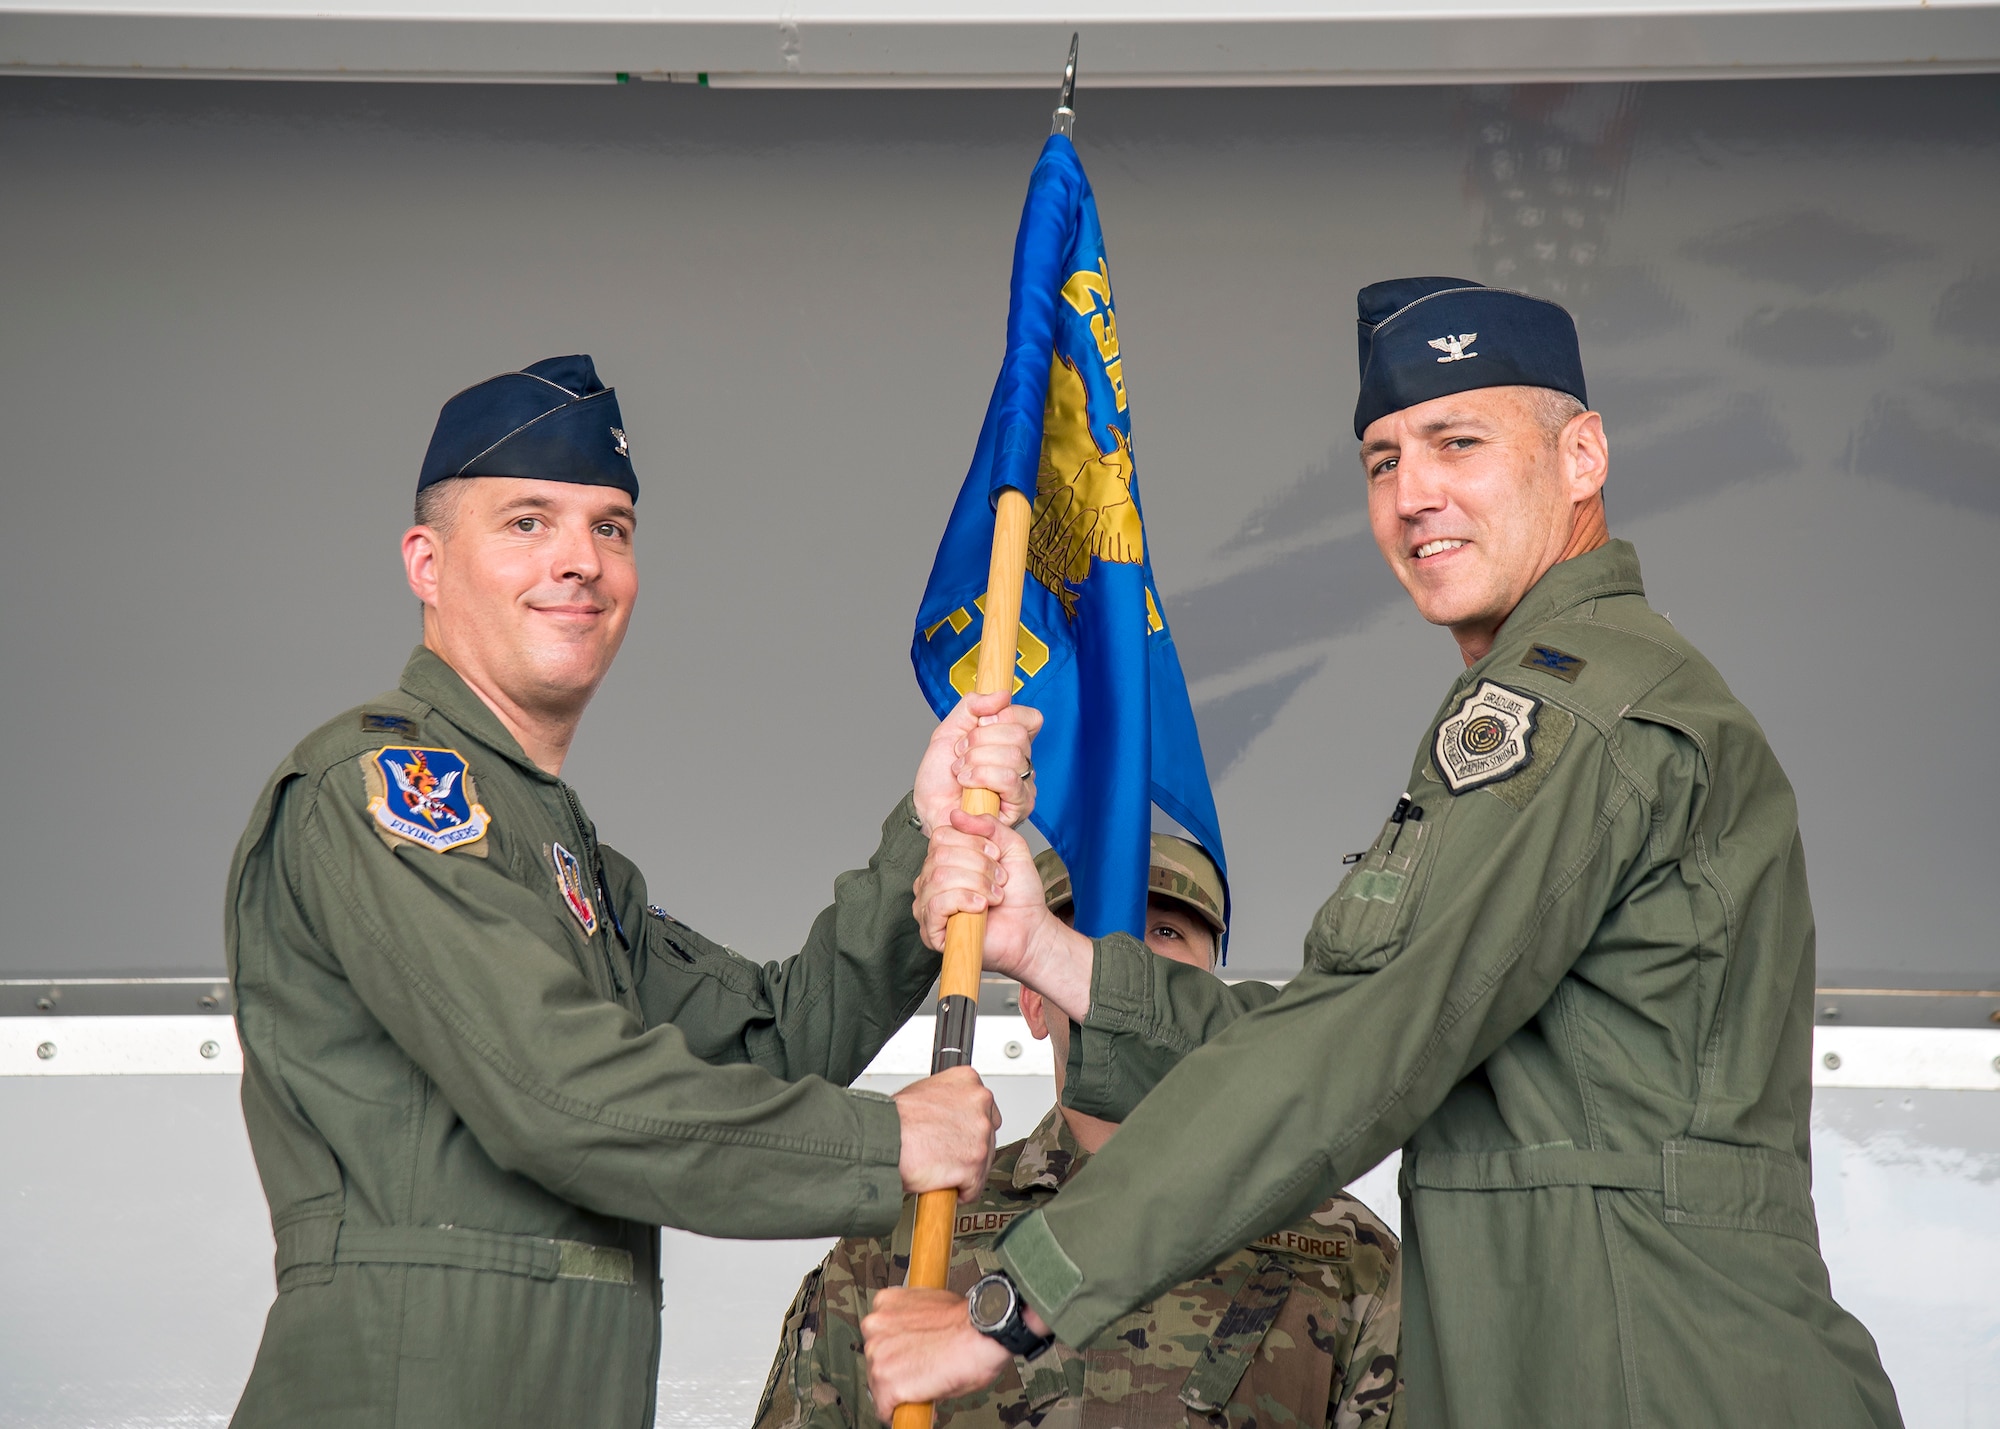 Col. Daniel Walls, left, 23d Wing commander, presents the guidon to Col. Ryan Haden, right, 23d Fighter Group (FG) commander,  as he assumes command during the 23d FG change of command ceremony, July 19, 2019, at Moody Air Force Base, Ga. The 23d FG is the Air Force’s largest A-10C Thunderbolt II fighter group that consists of two combat ready A-10C squadrons and an operation support squadron.  Haden previously served as the J5/8 plans division, Eastern Flank Branch Chief, United States European Command, Germany. Haden is no stranger to the 23d FG as he previously commanded the 74th Fighter Squadron and served as deputy commander for the 23d FG. (U.S. Air Force photo by Airman 1st Class Eugene Oliver)